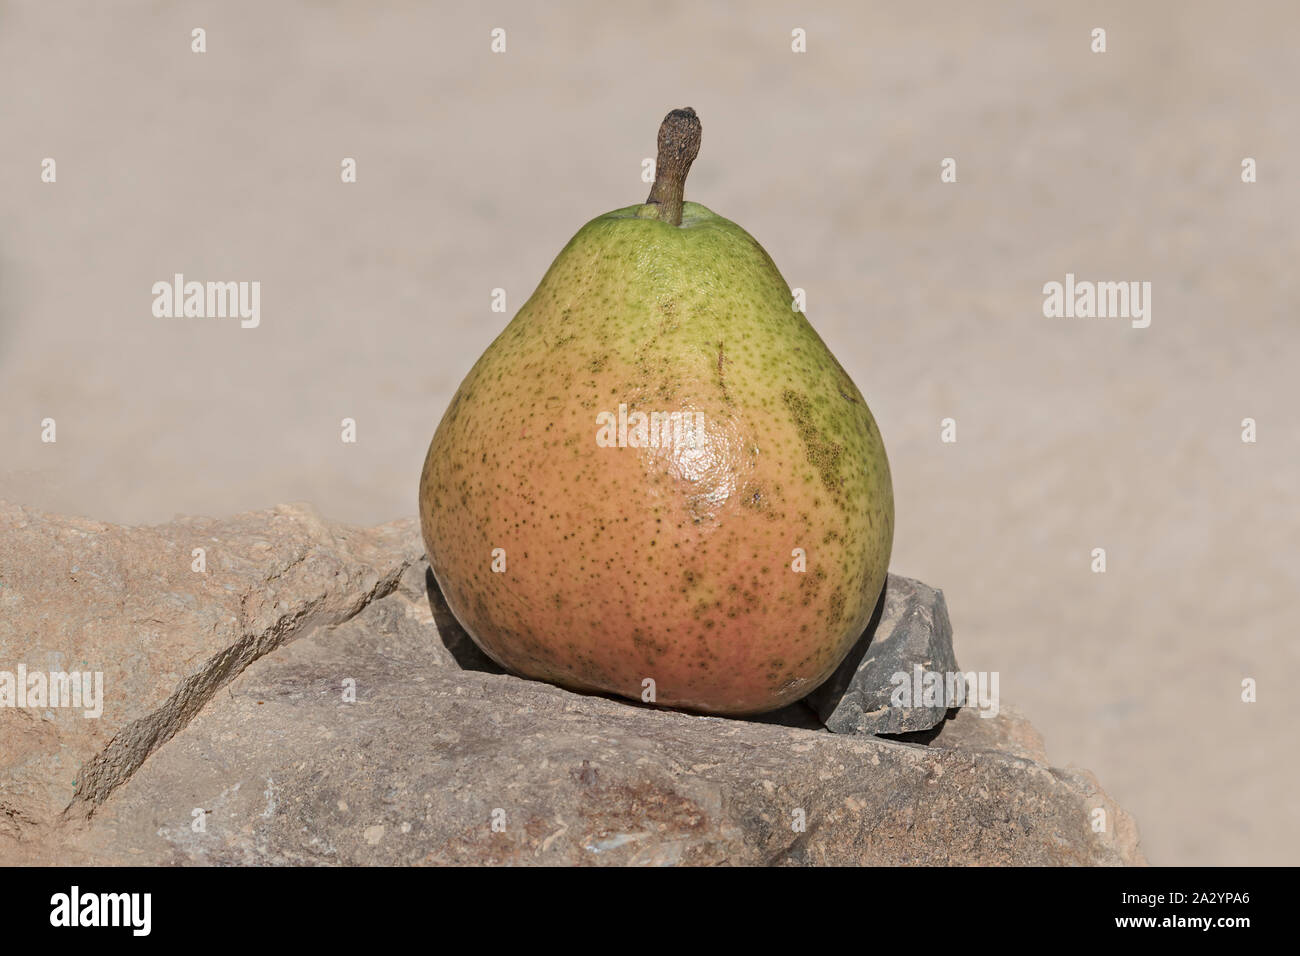 still life of one overly ripe comice pear sitting on a rock with a blurred beige sand background Stock Photo